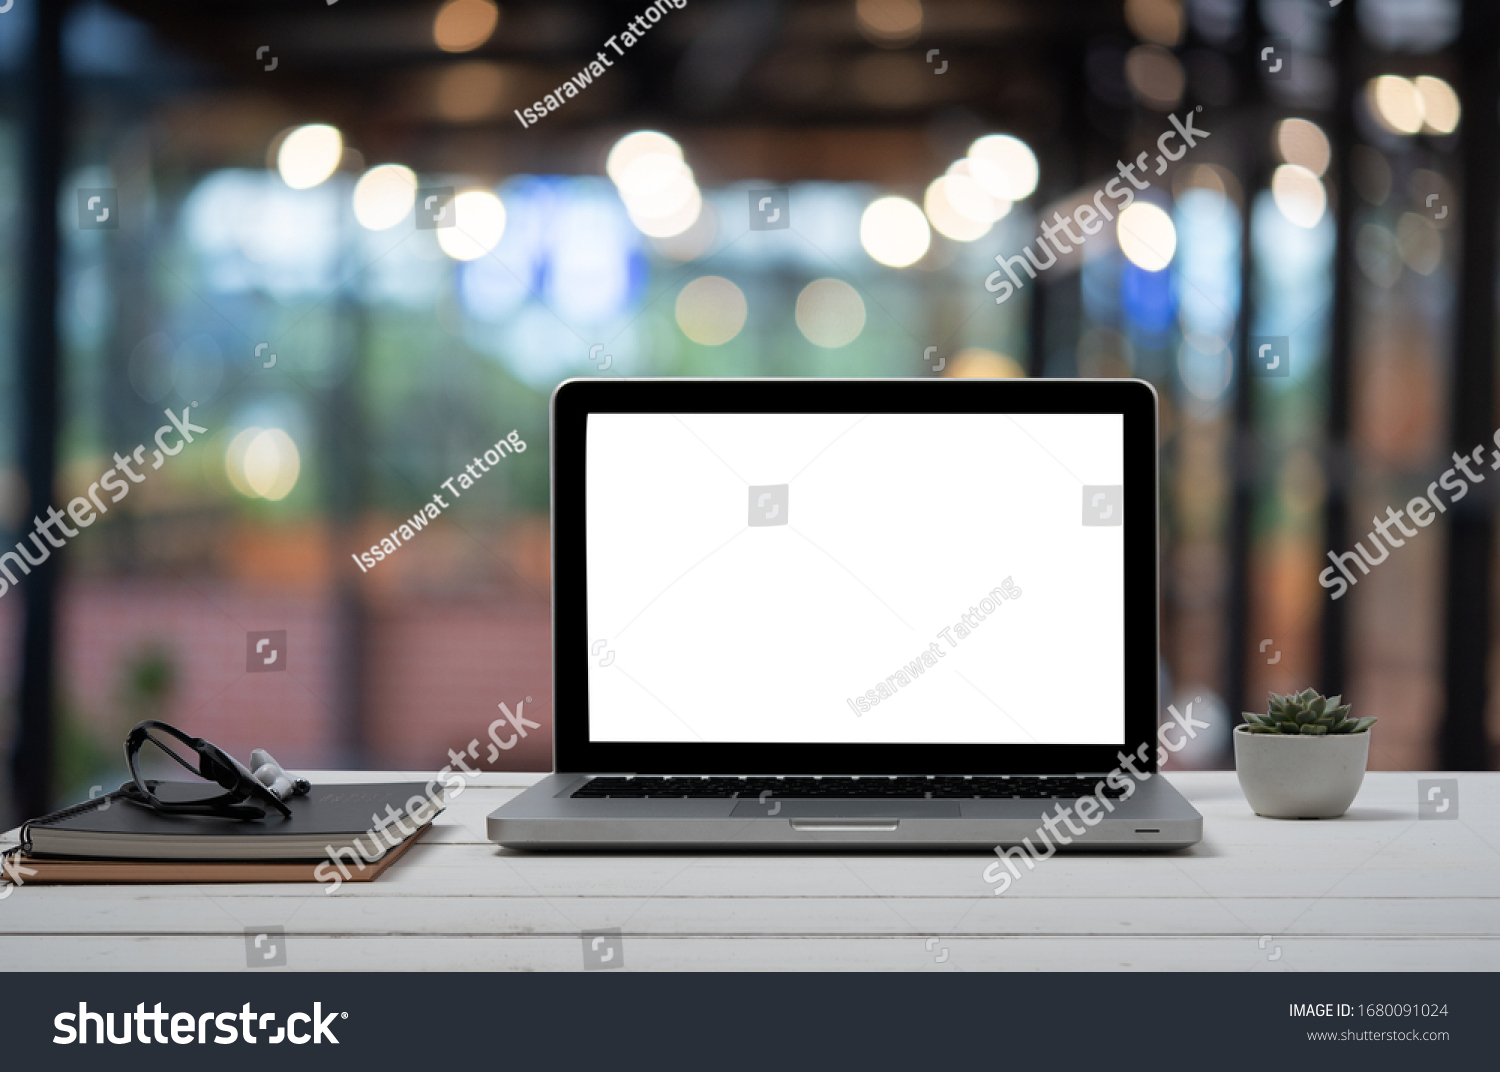 Laptop with blank screen and smartphone on table. #1680091024